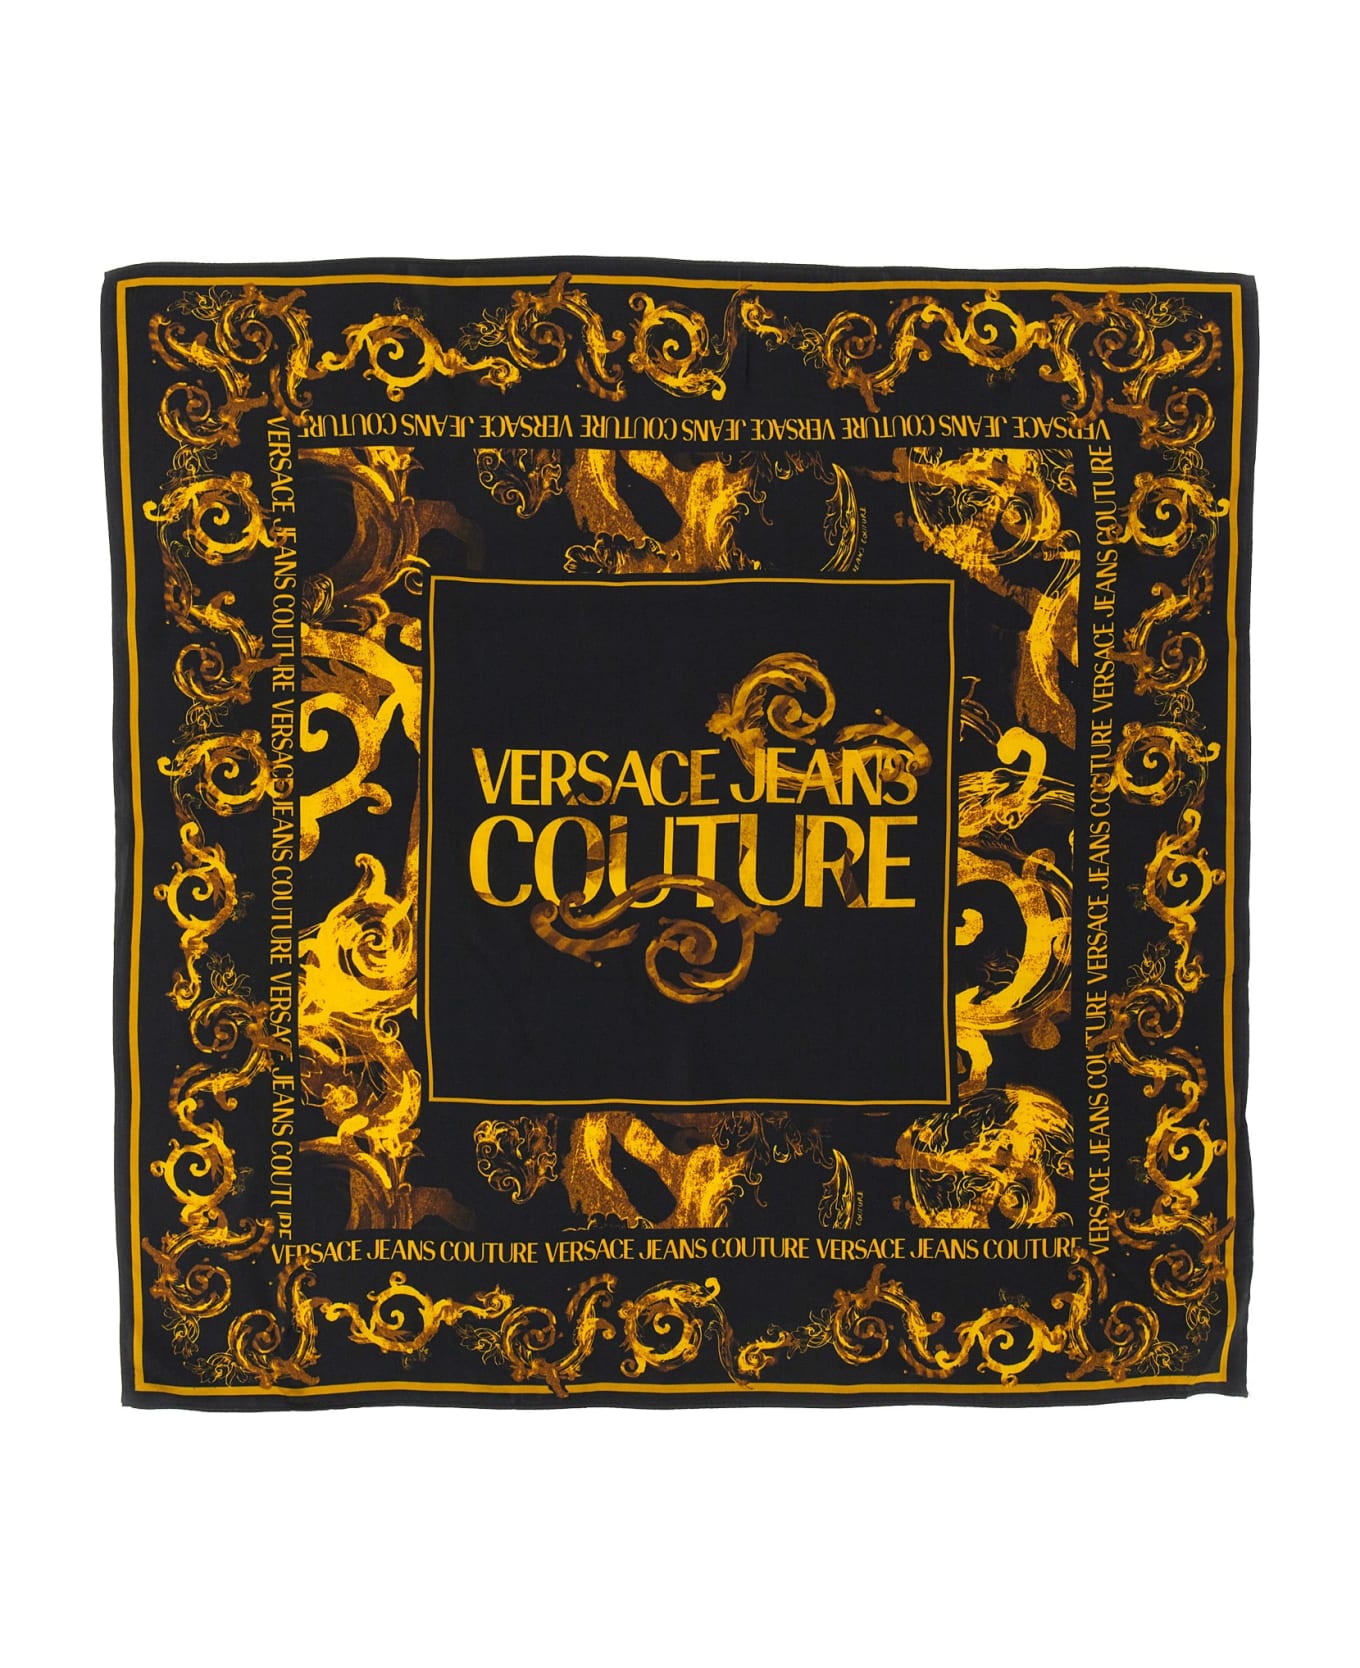 Versace Jeans Couture Silk Scarf - MULTICOLOR スカーフ＆ストール